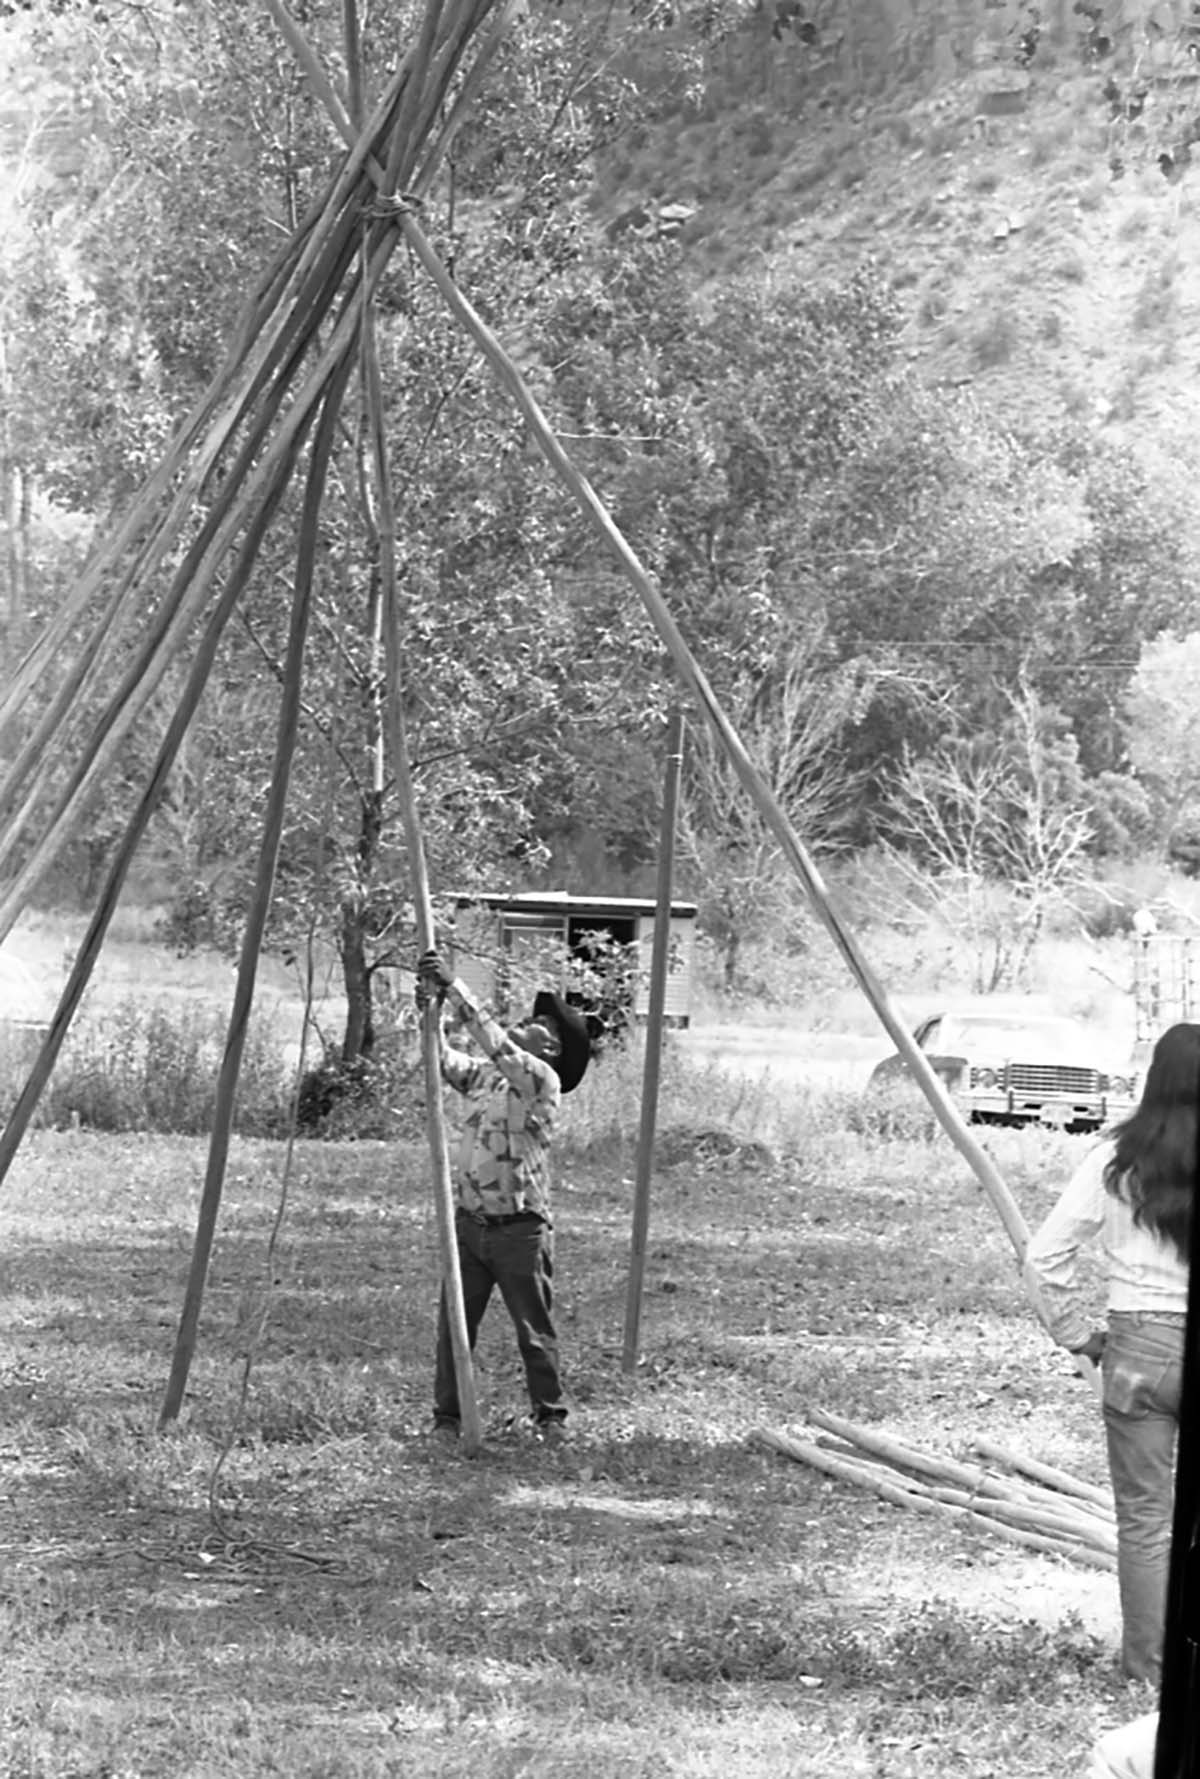 Clifford Jake setting up poles for his tipi demonstration at the second annual Folklife Festival, Zion National Park Nature Center, September 7-8, 1978.